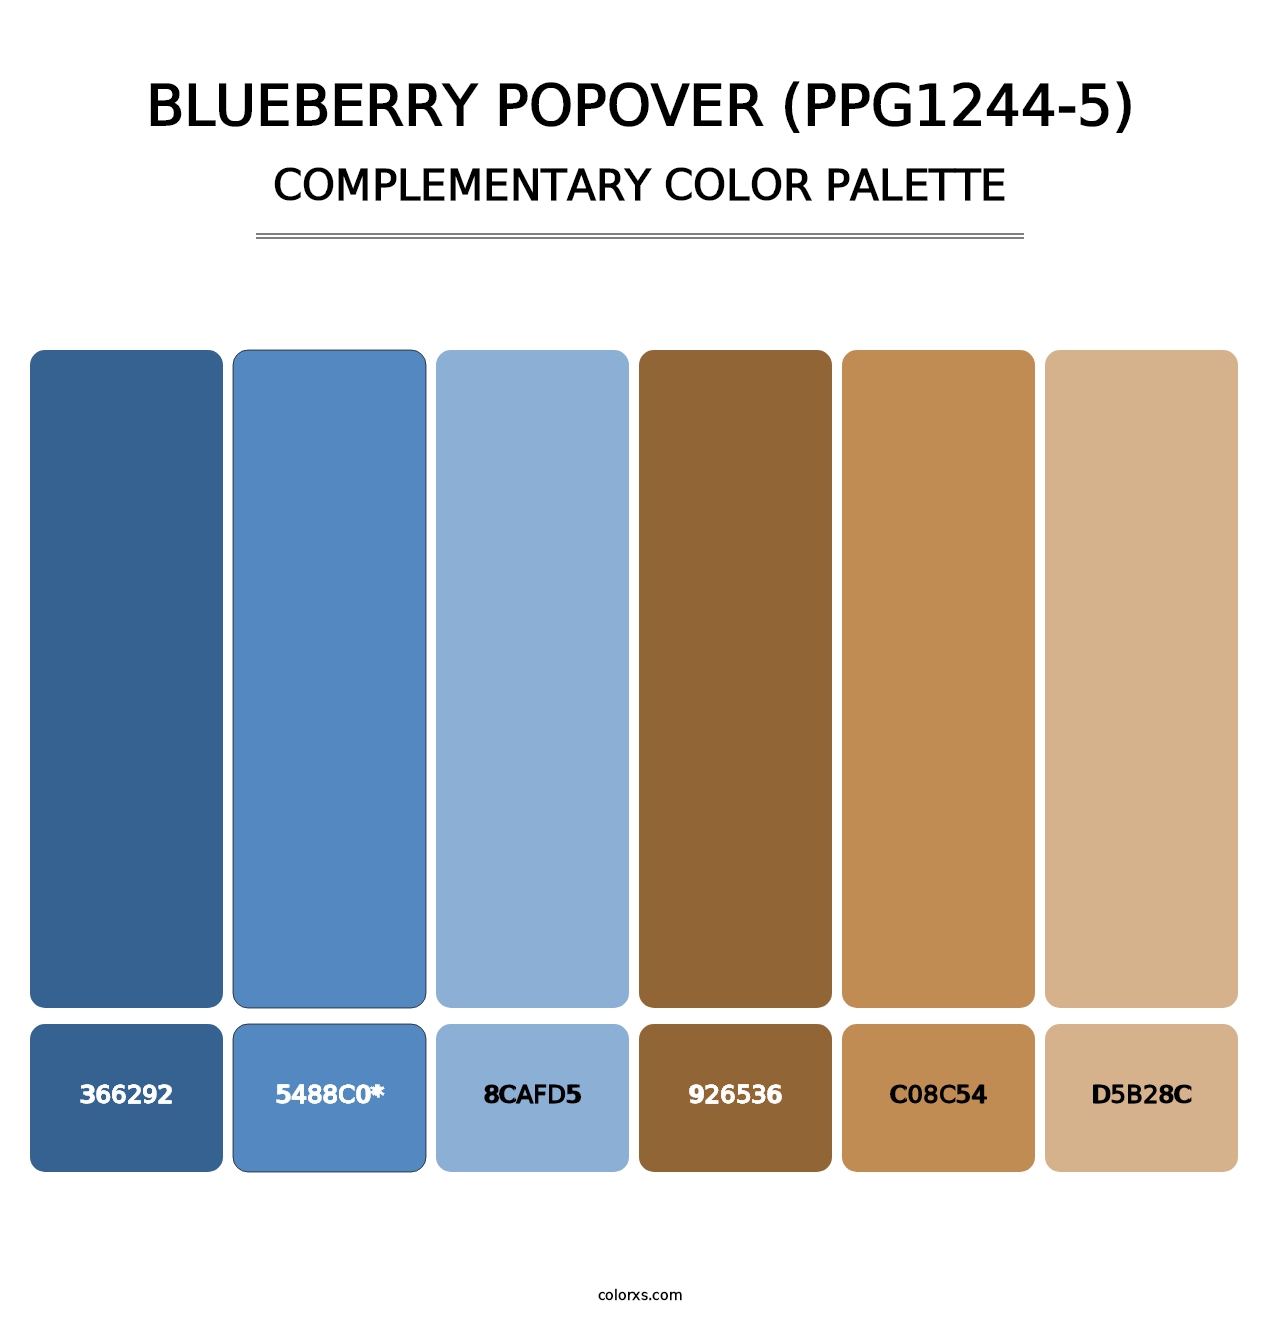 Blueberry Popover (PPG1244-5) - Complementary Color Palette